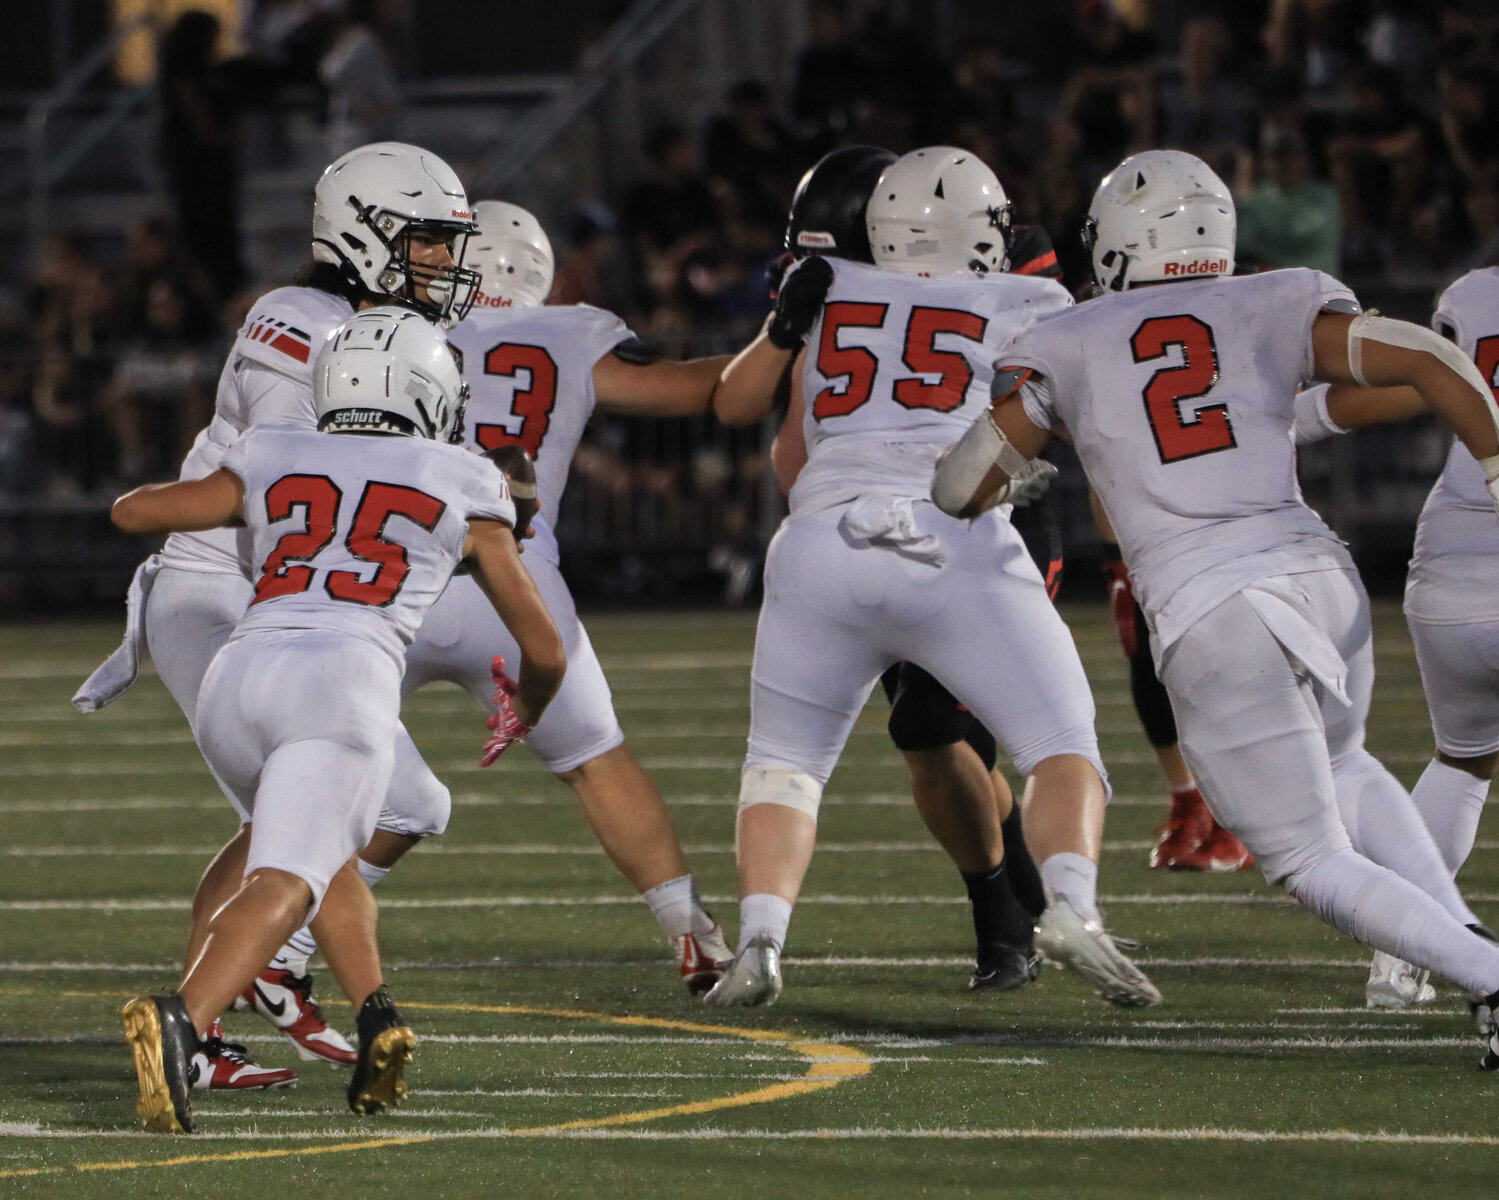 Senior running back Anthony Kiamco takes a handoff against the Camas Papermakers on Sept. 1.